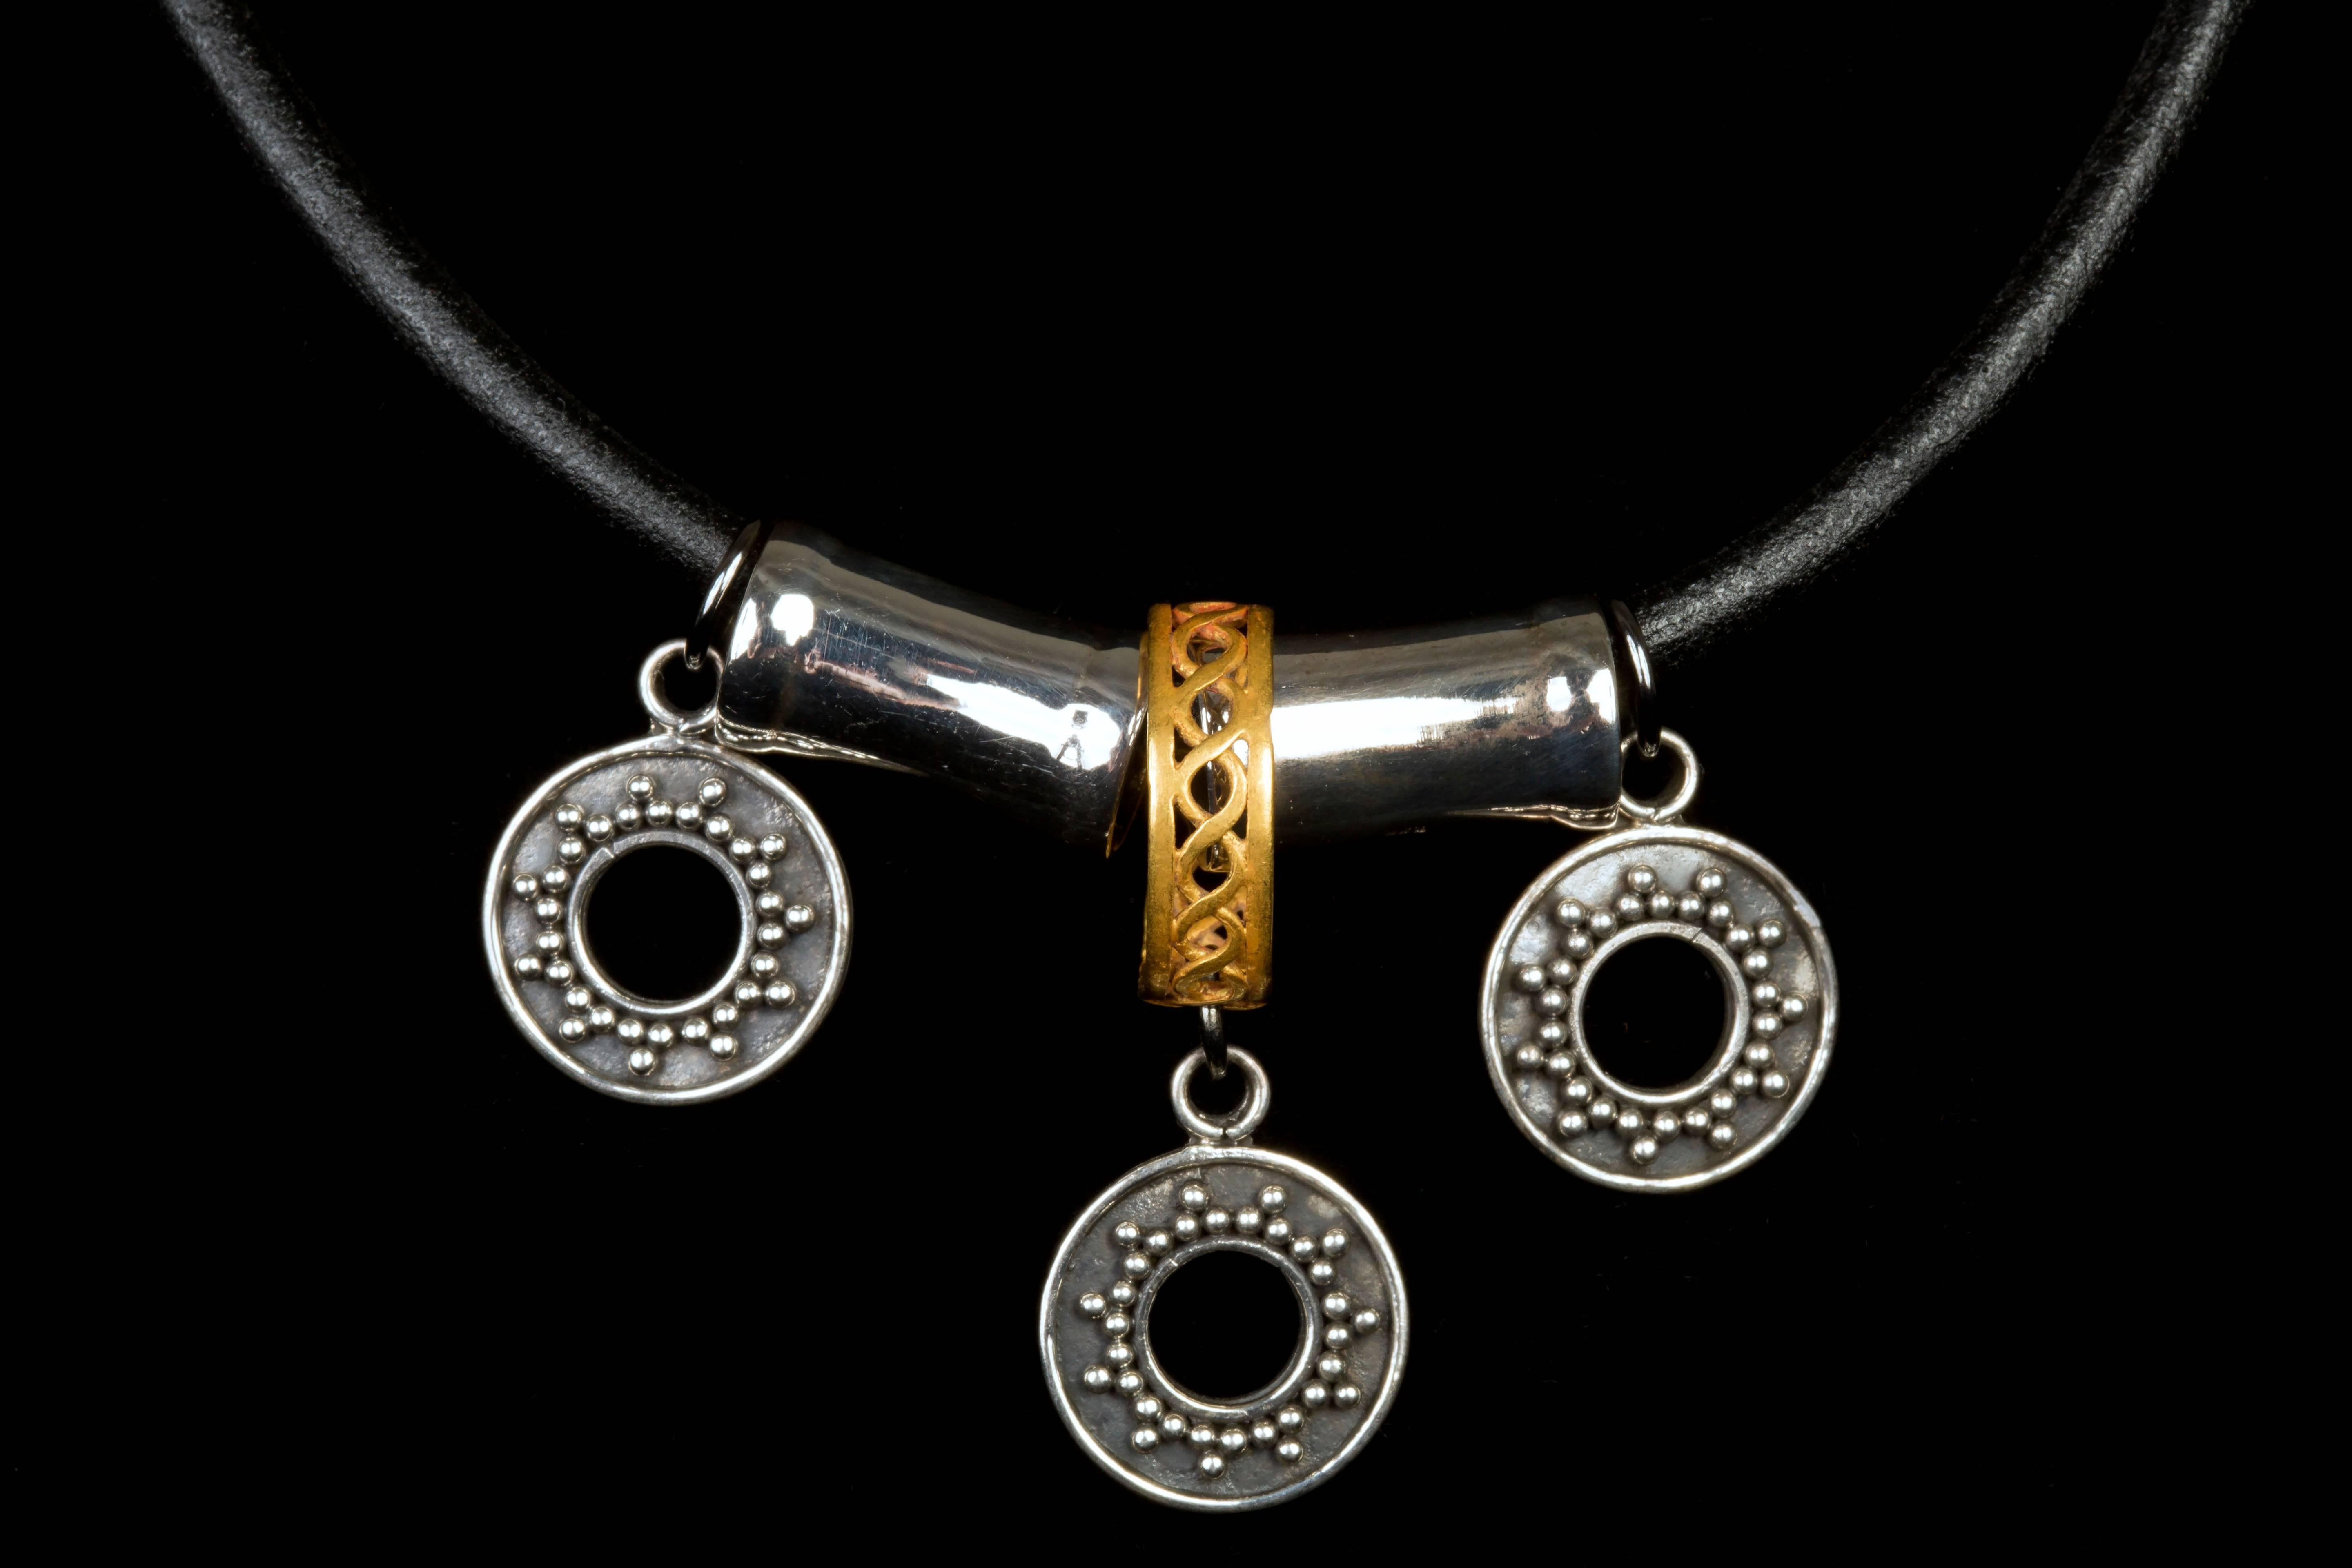 The central piece of this necklace was used as a ring in ancient times. Probably for a young individual given its size. It was made in the lost-wax technique with interlaced strands. Adorned with 3 contemporary roundels.

This piece comes from our